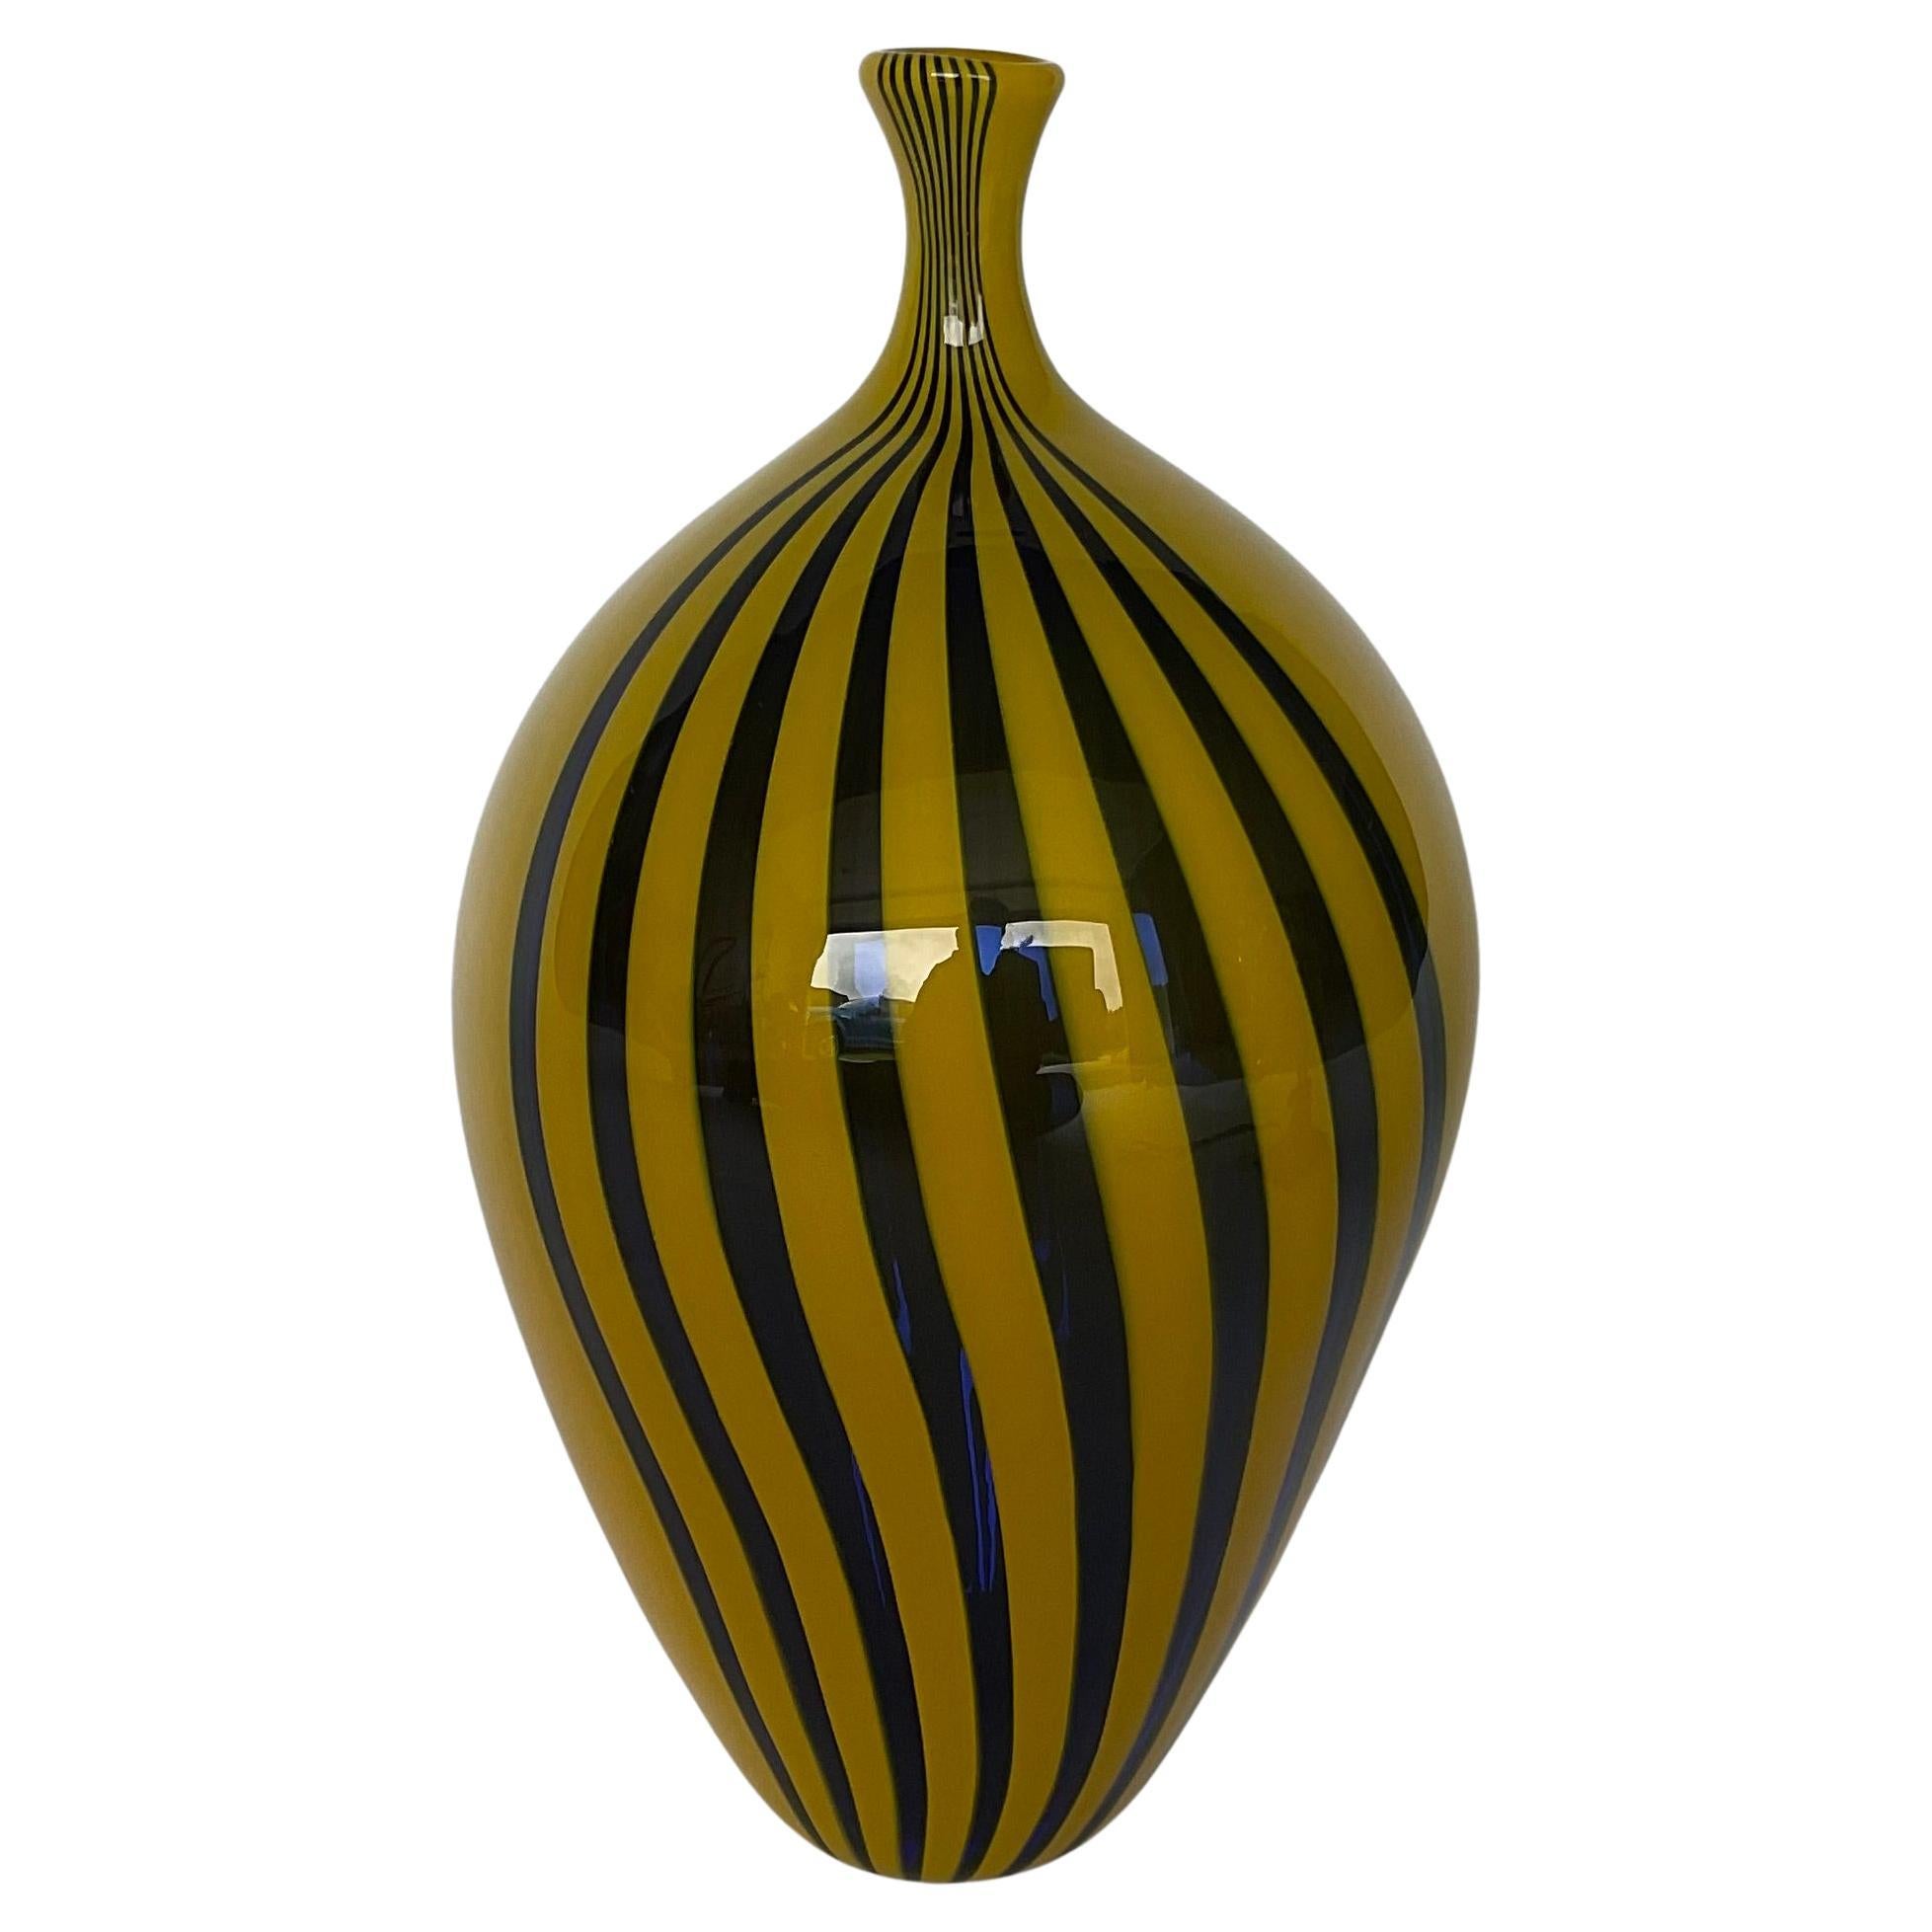 Afro Celotto Artist Signed Studio Murano Art Glass Vase in blue and yellow  For Sale